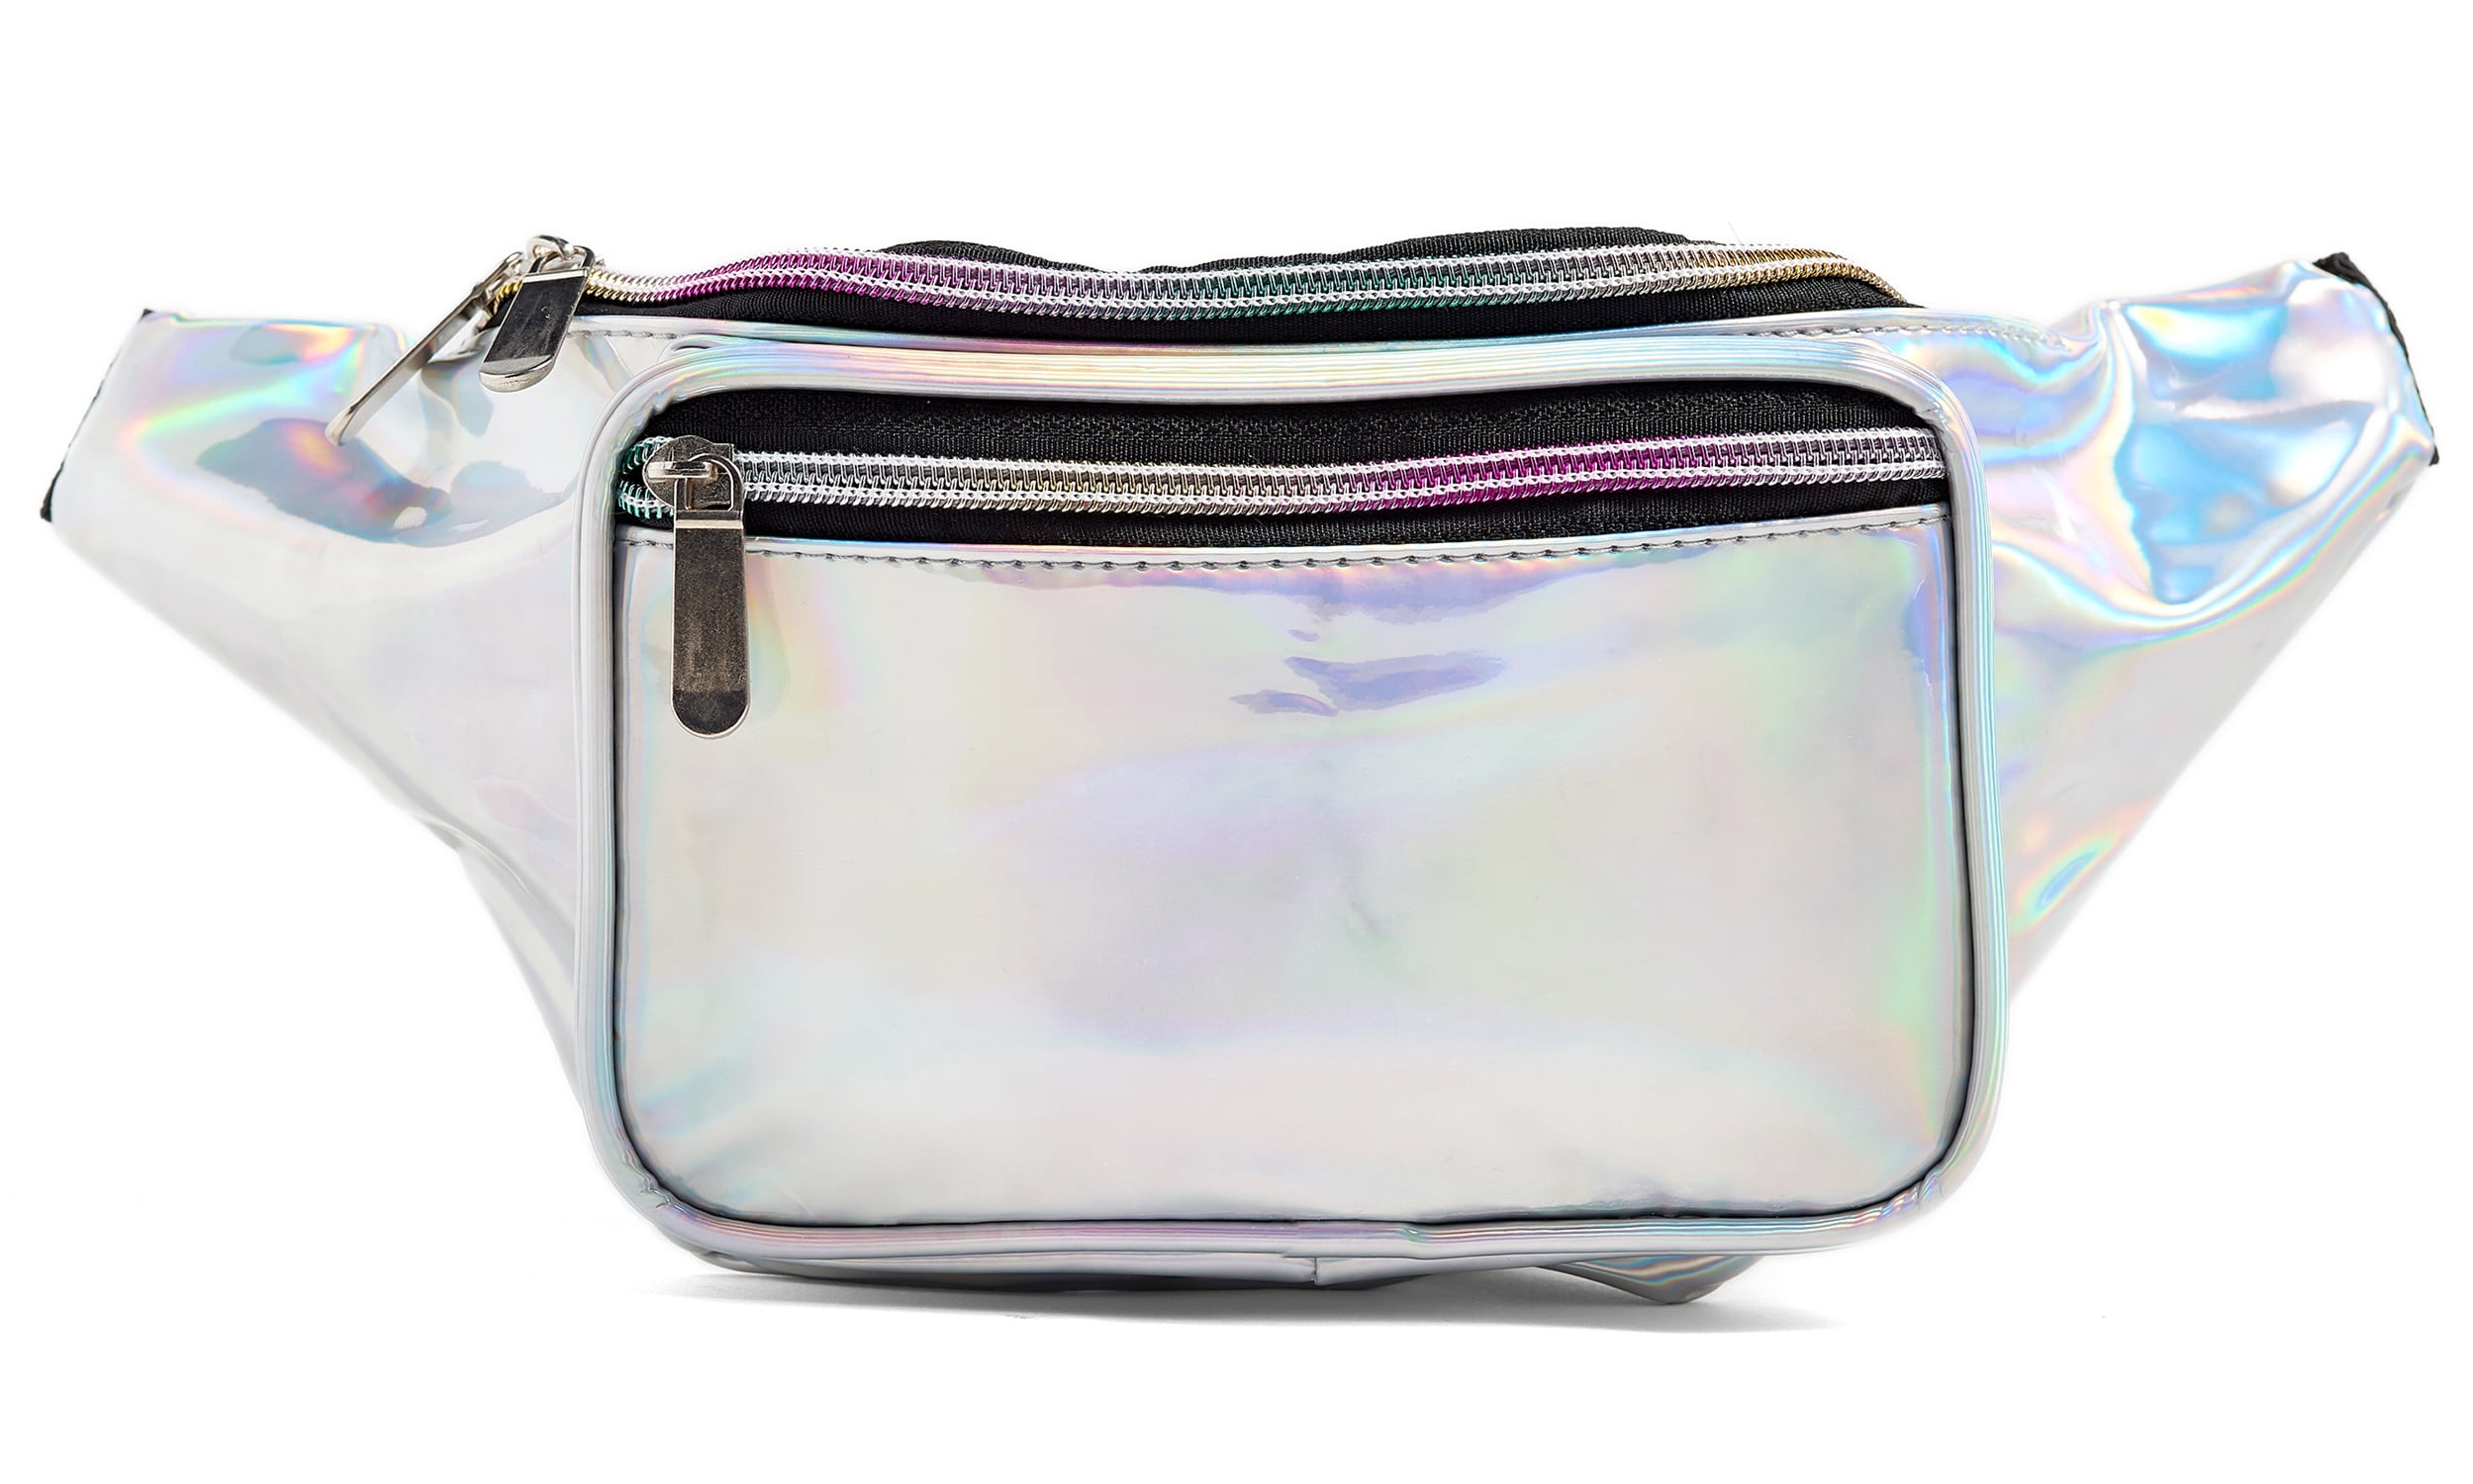 Limited Edition Festival Flat Iron (with Holographic Bandolier Bag – Glister